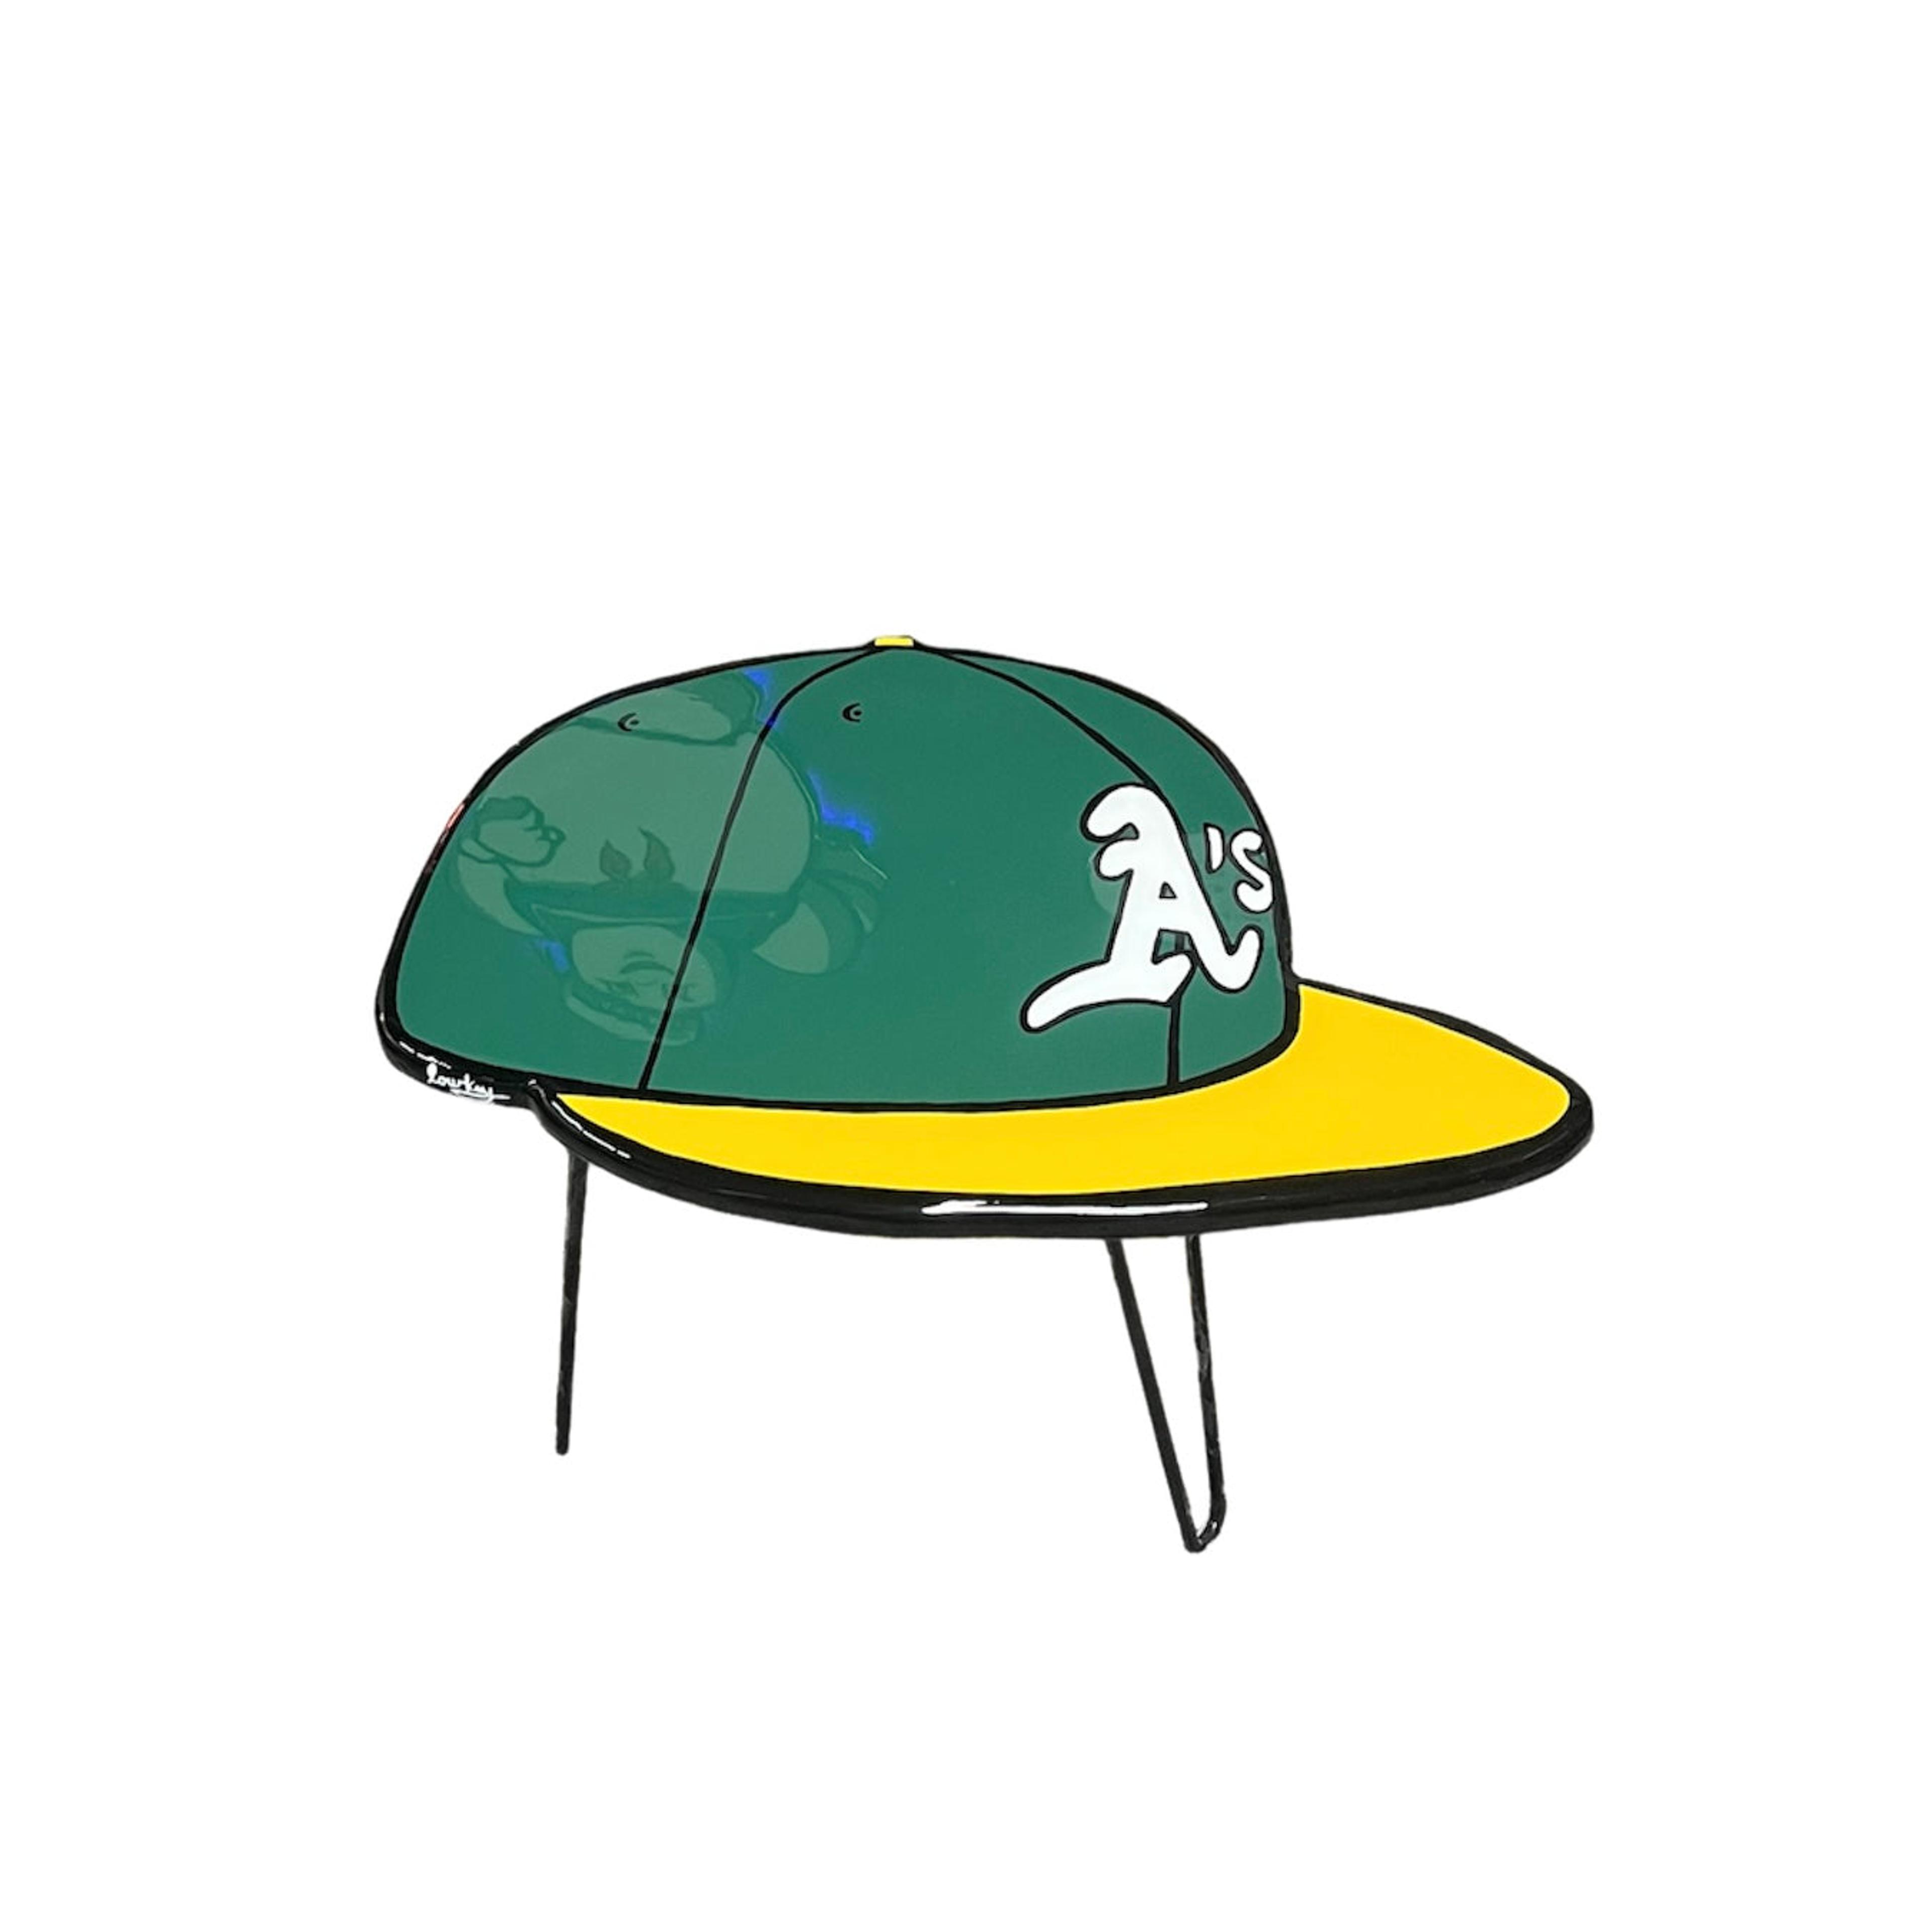 OAKLAND A’s  SIDE TABLE